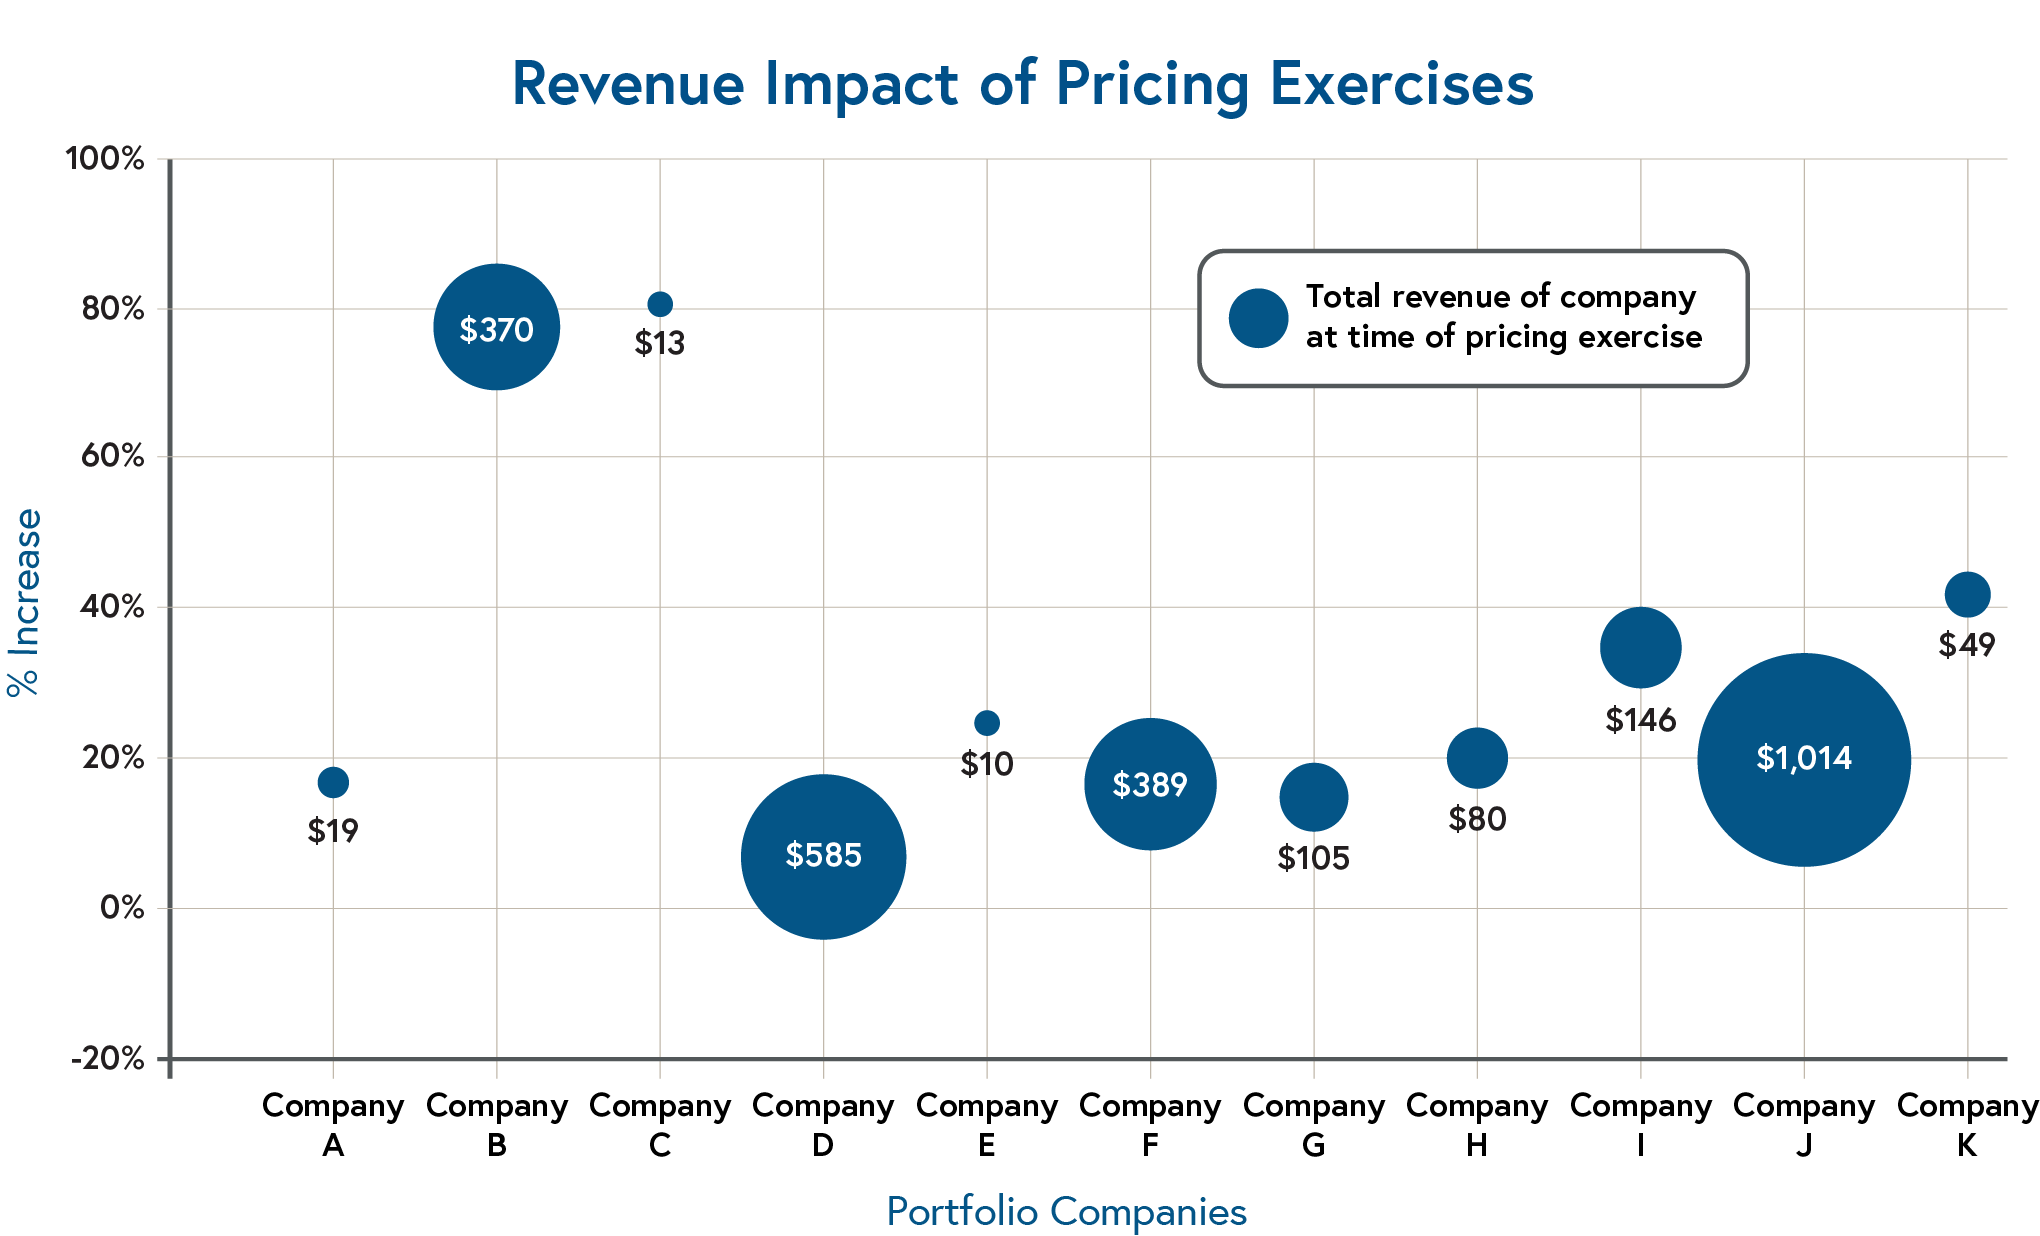 Chart showing Revenue Impact of Pricing Exercises